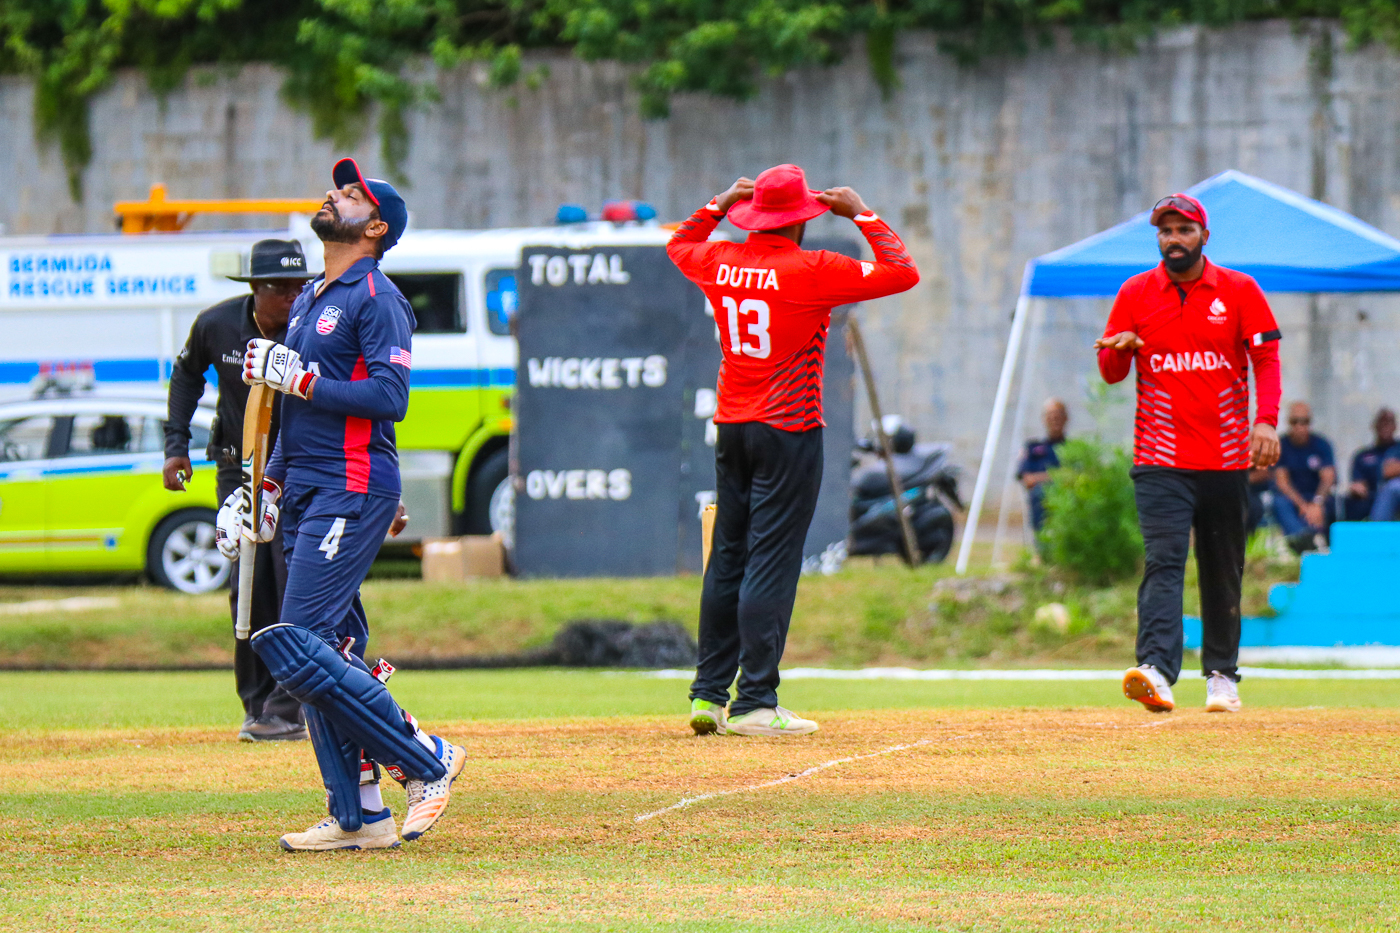 ICC Announce Men’s T20 World Cup Americas Qualifier postponed due to COVID-19 restrictions